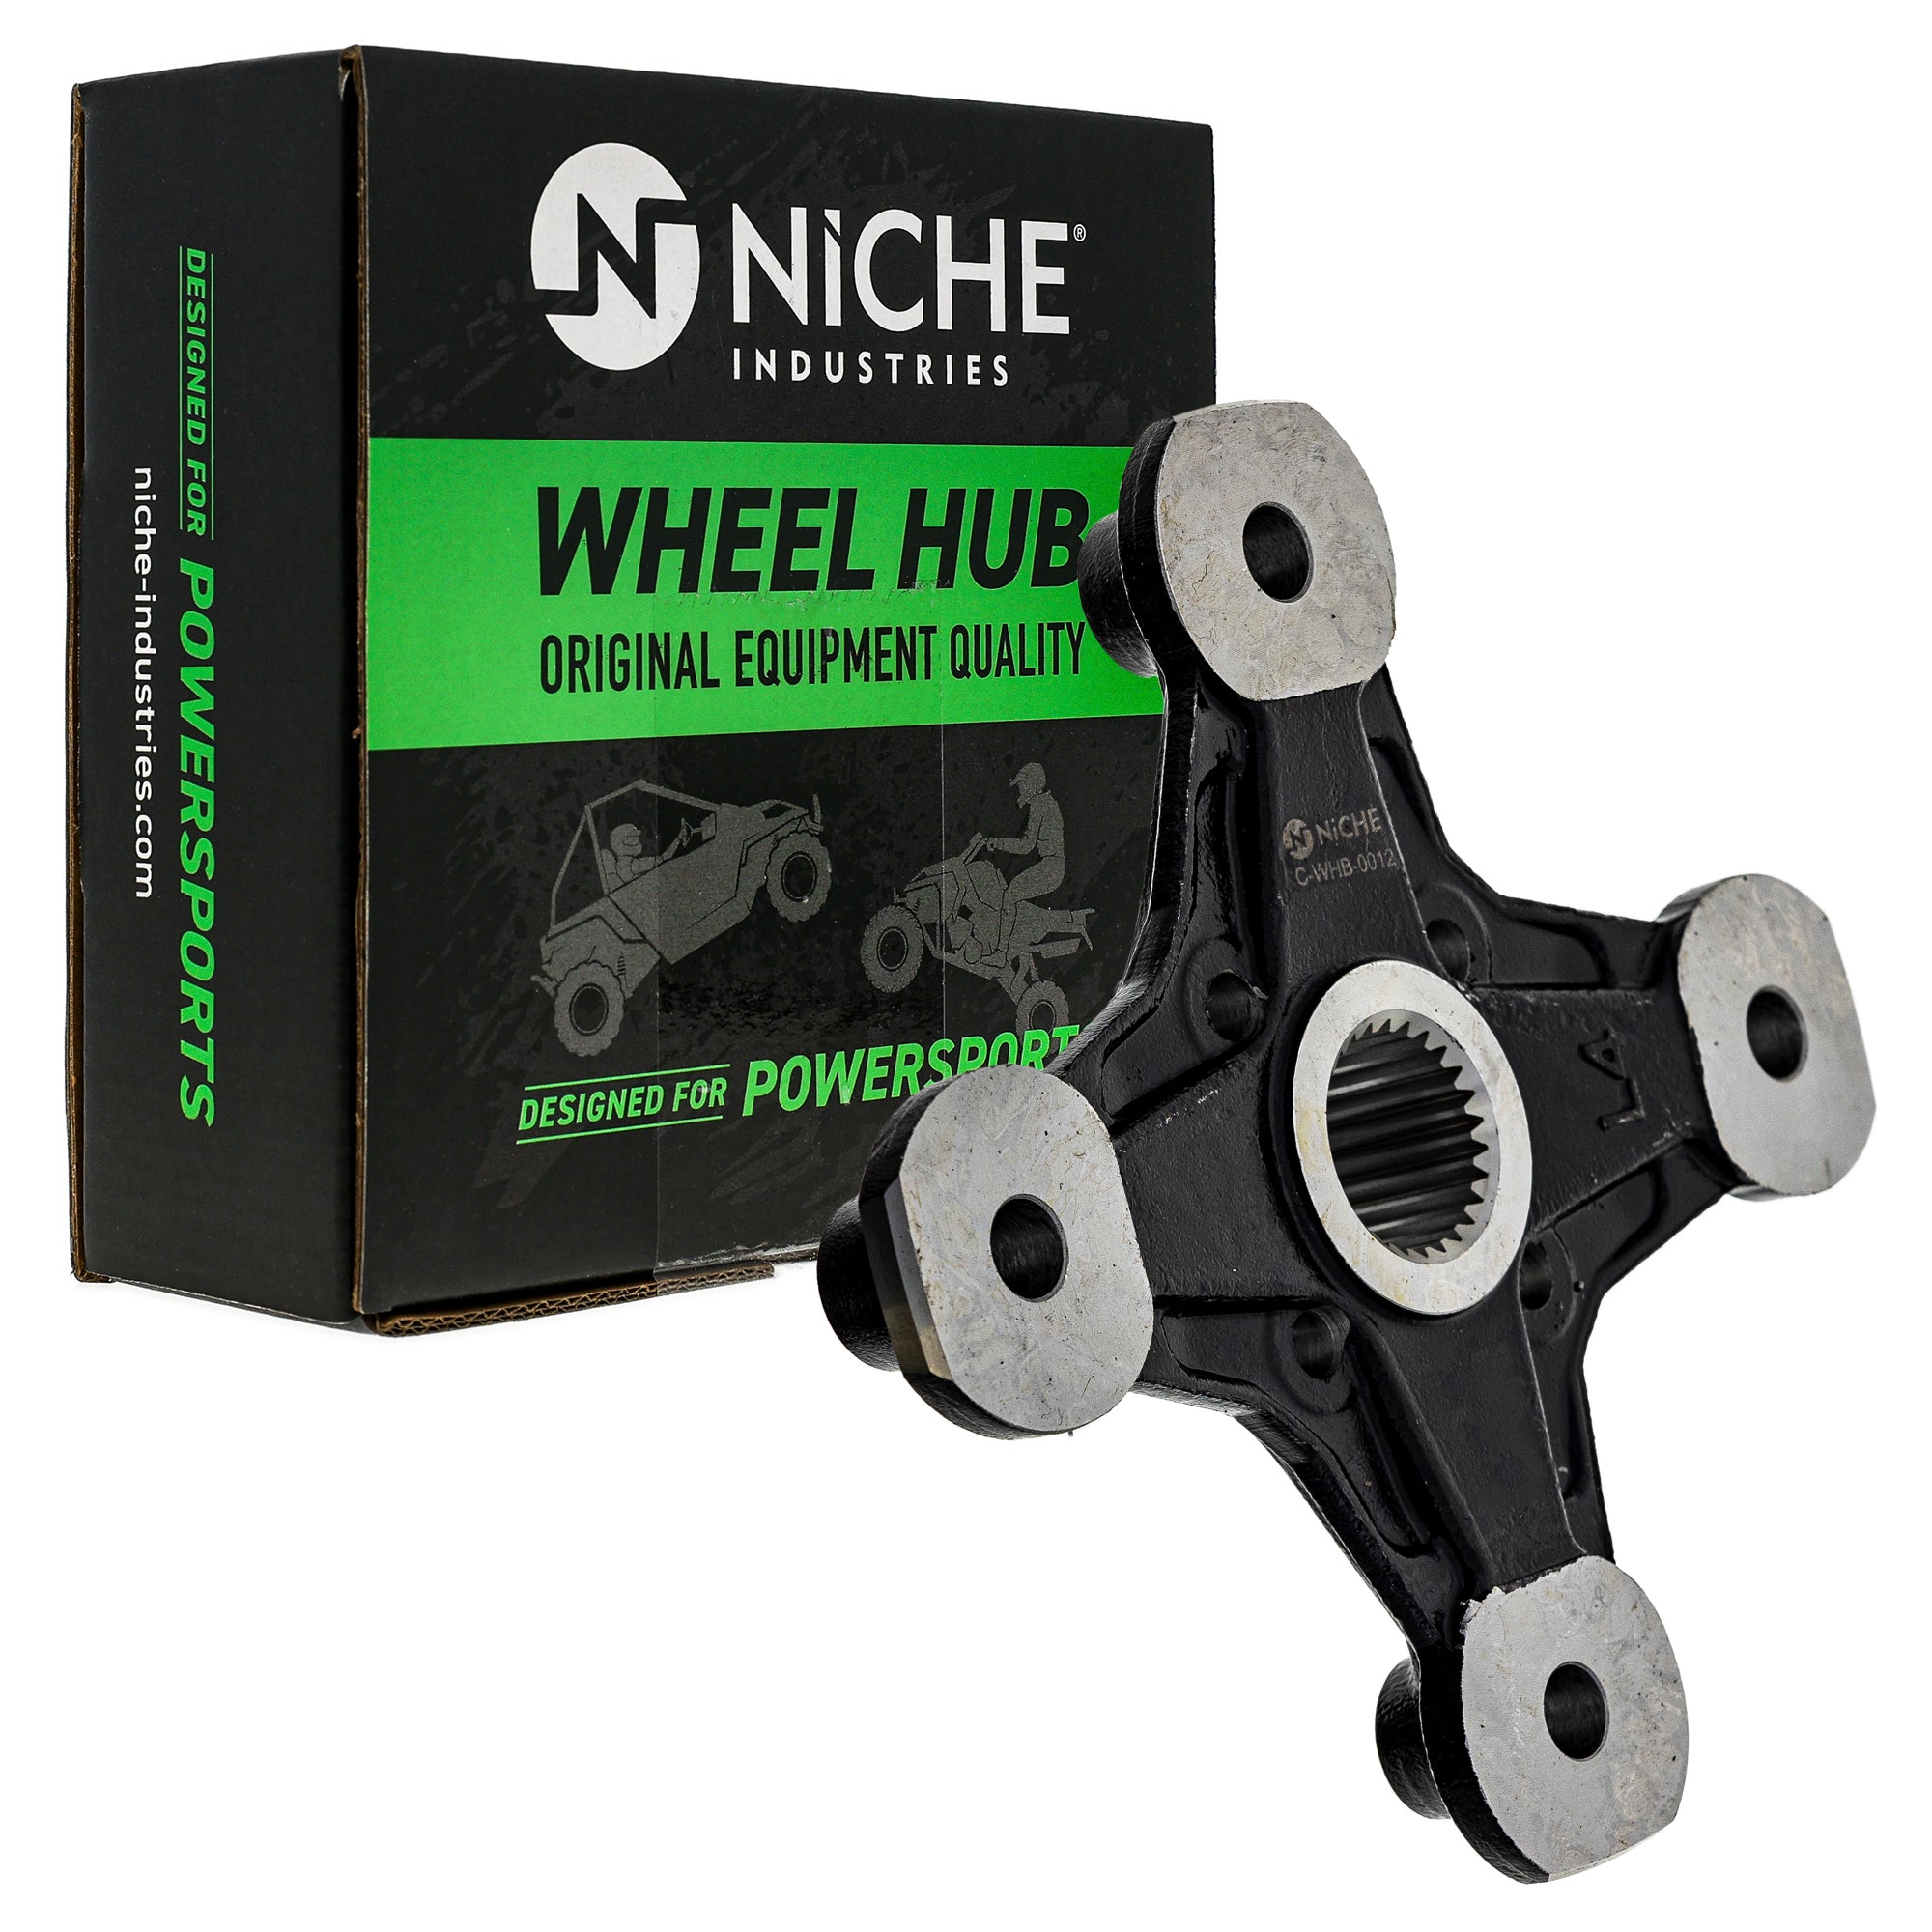 NICHE 519-CWH-2234B Wheel Hub Set 2-Pack for zOTHER BRP Can-Am Ski-Doo